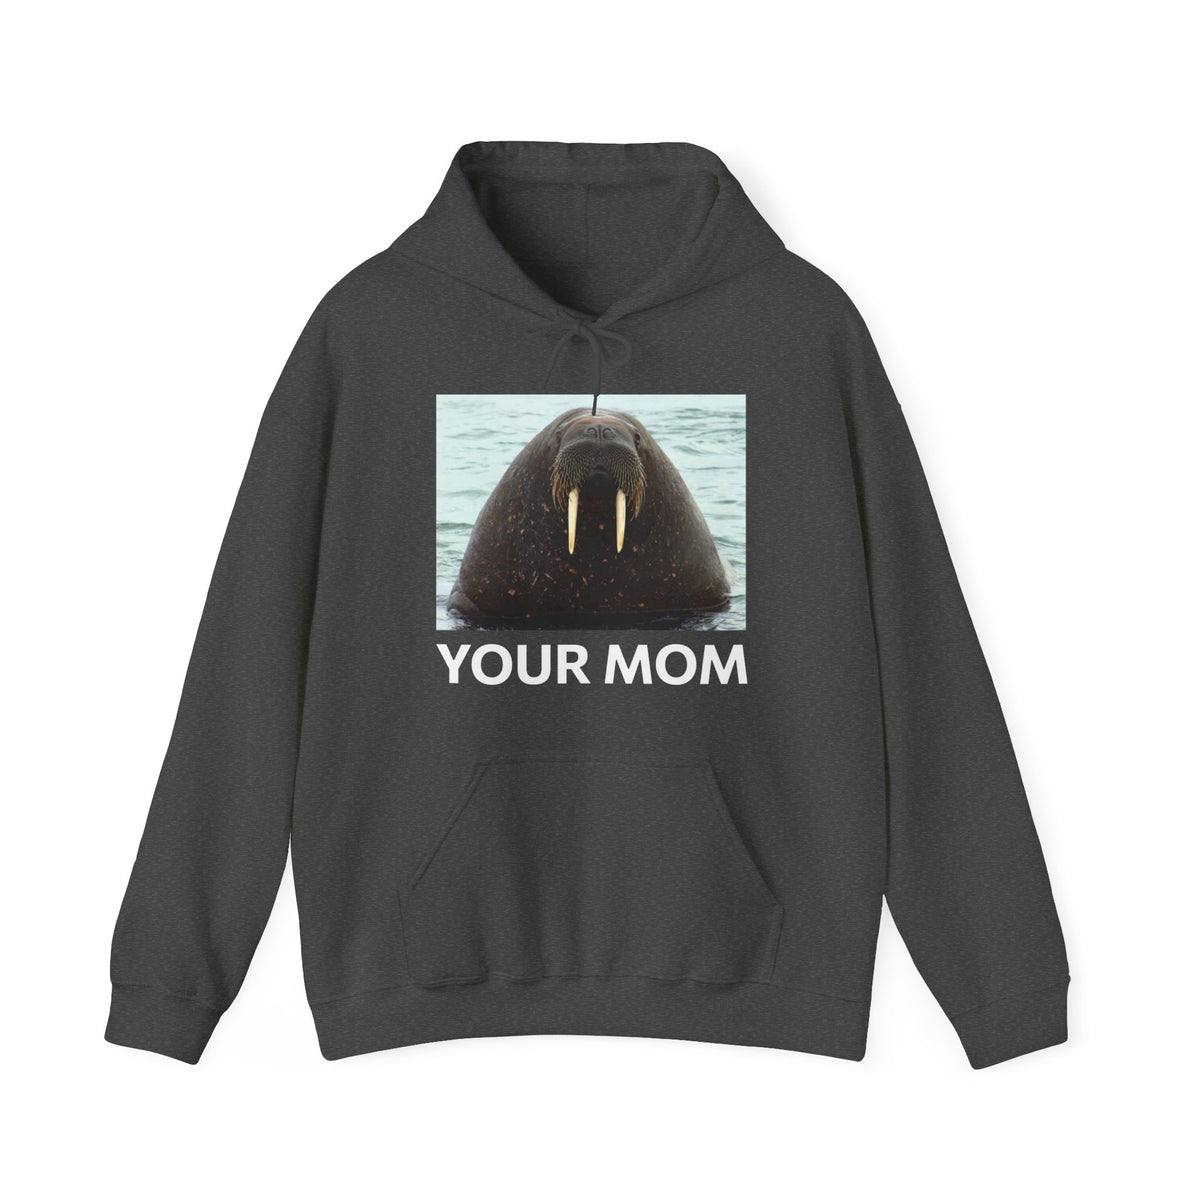 Your Mom - Hoodie